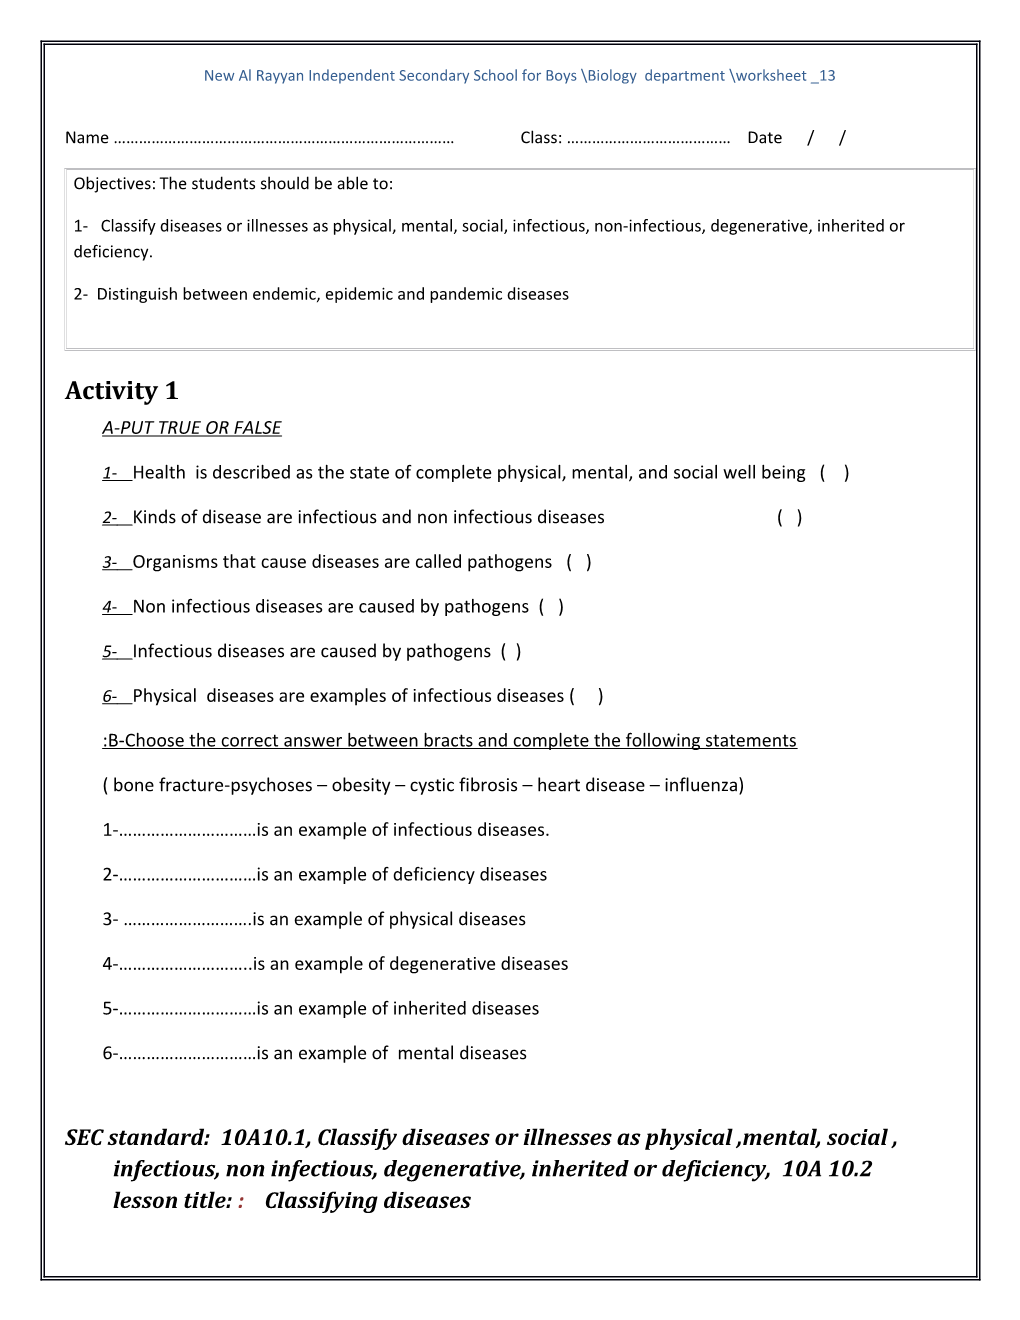 New Al Rayyan Independent Secondary School for Boys Biology Department Worksheet 1